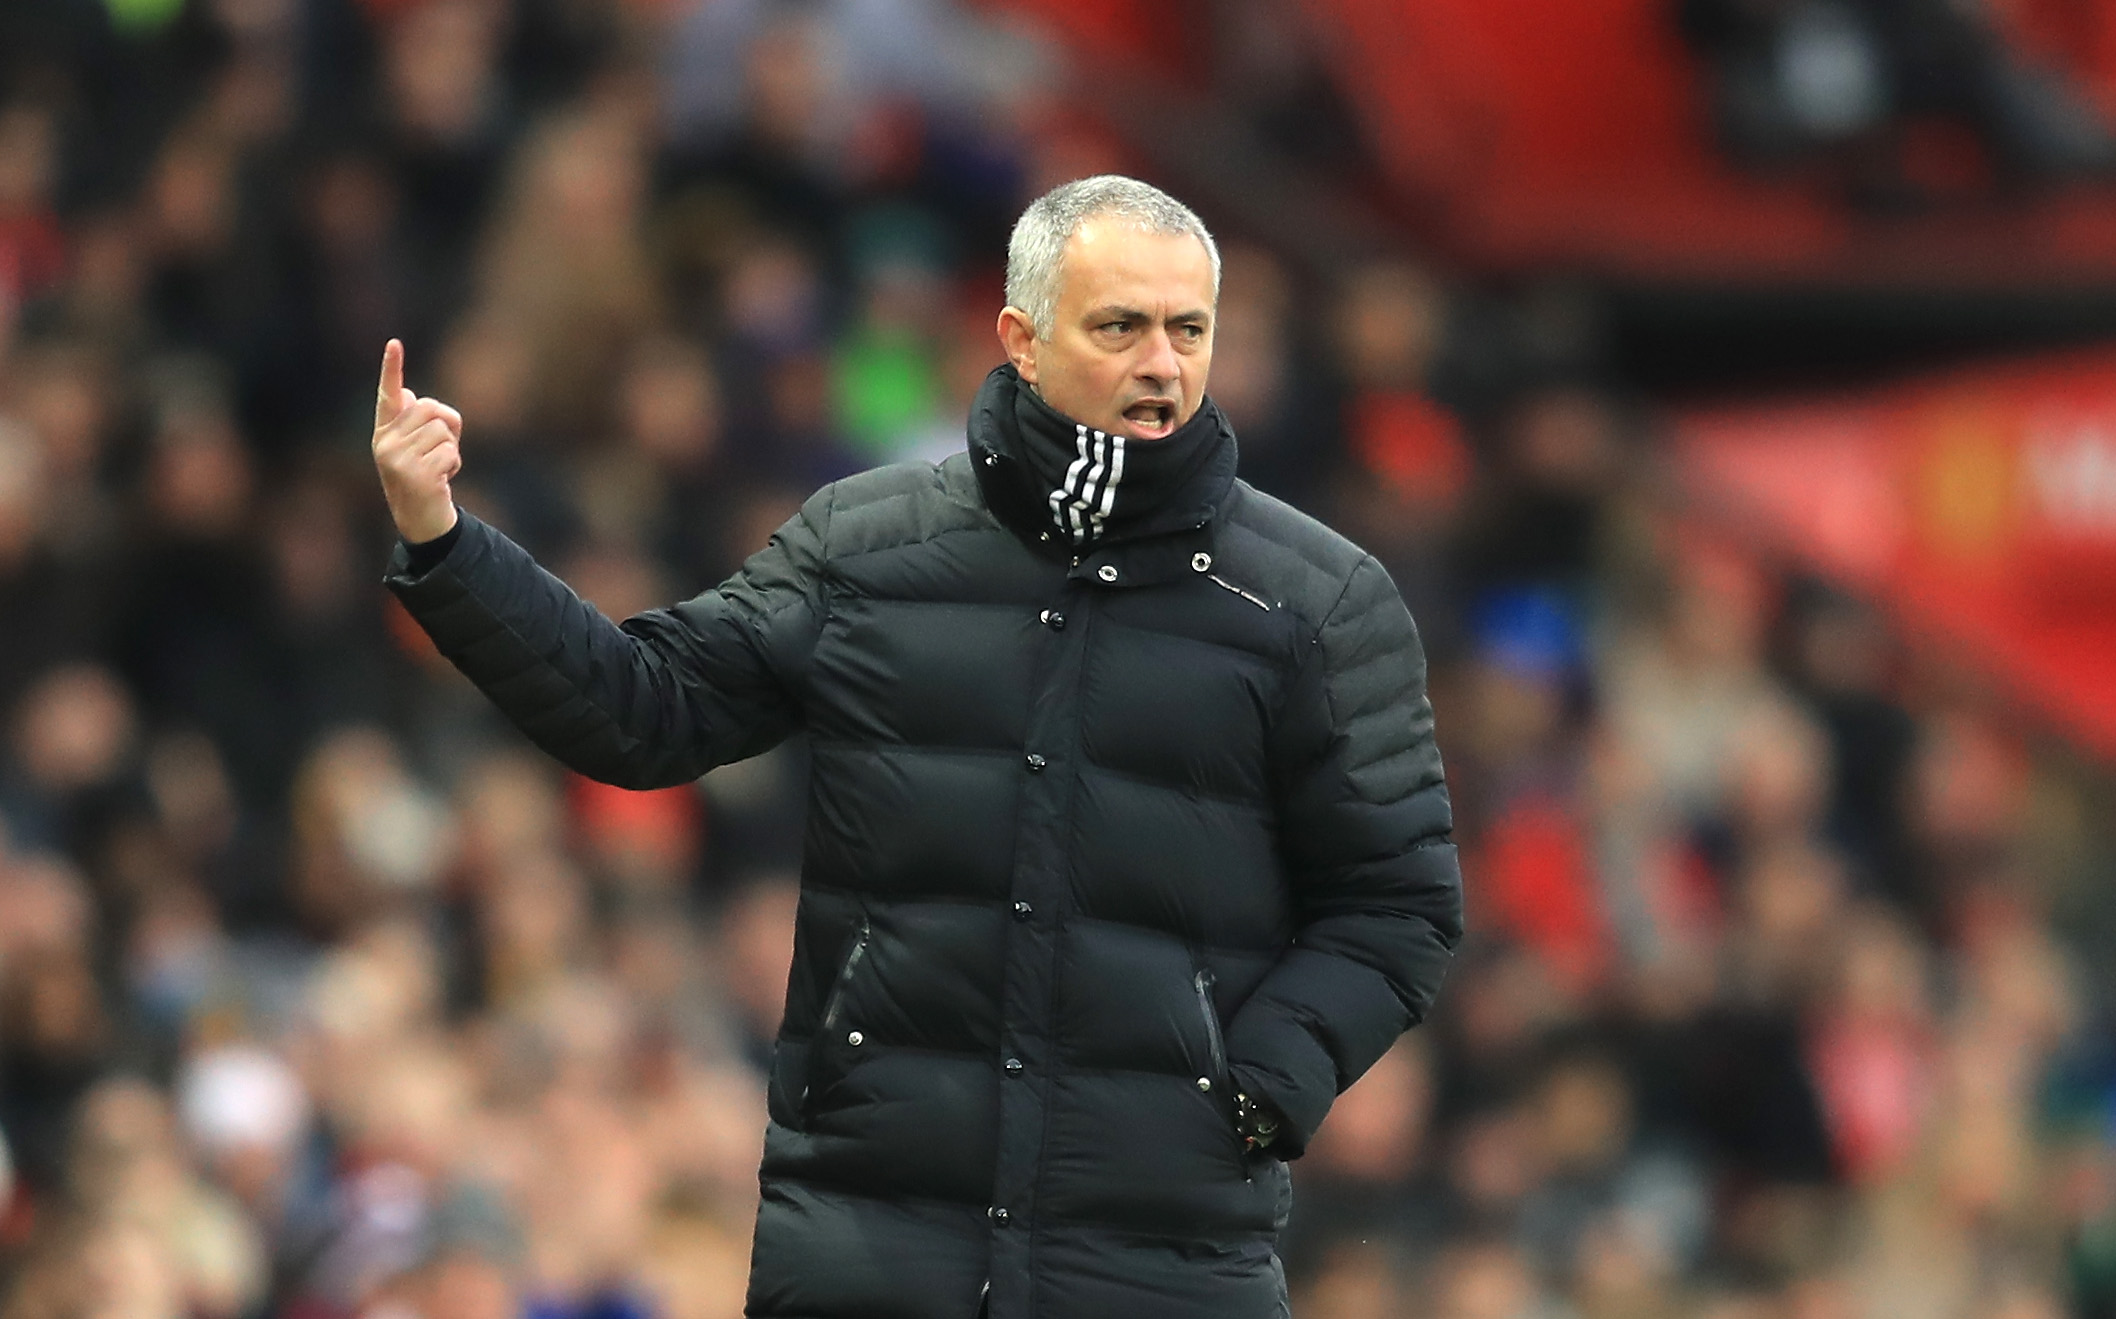 MANCHESTER, ENGLAND - FEBRUARY 11:  Jose Mourinho, Manager of Manchester United gestures to the crowd during the Premier League match between Manchester United and Watford at Old Trafford on February 11, 2017 in Manchester, England.  (Photo by Richard Heathcote/Getty Images)